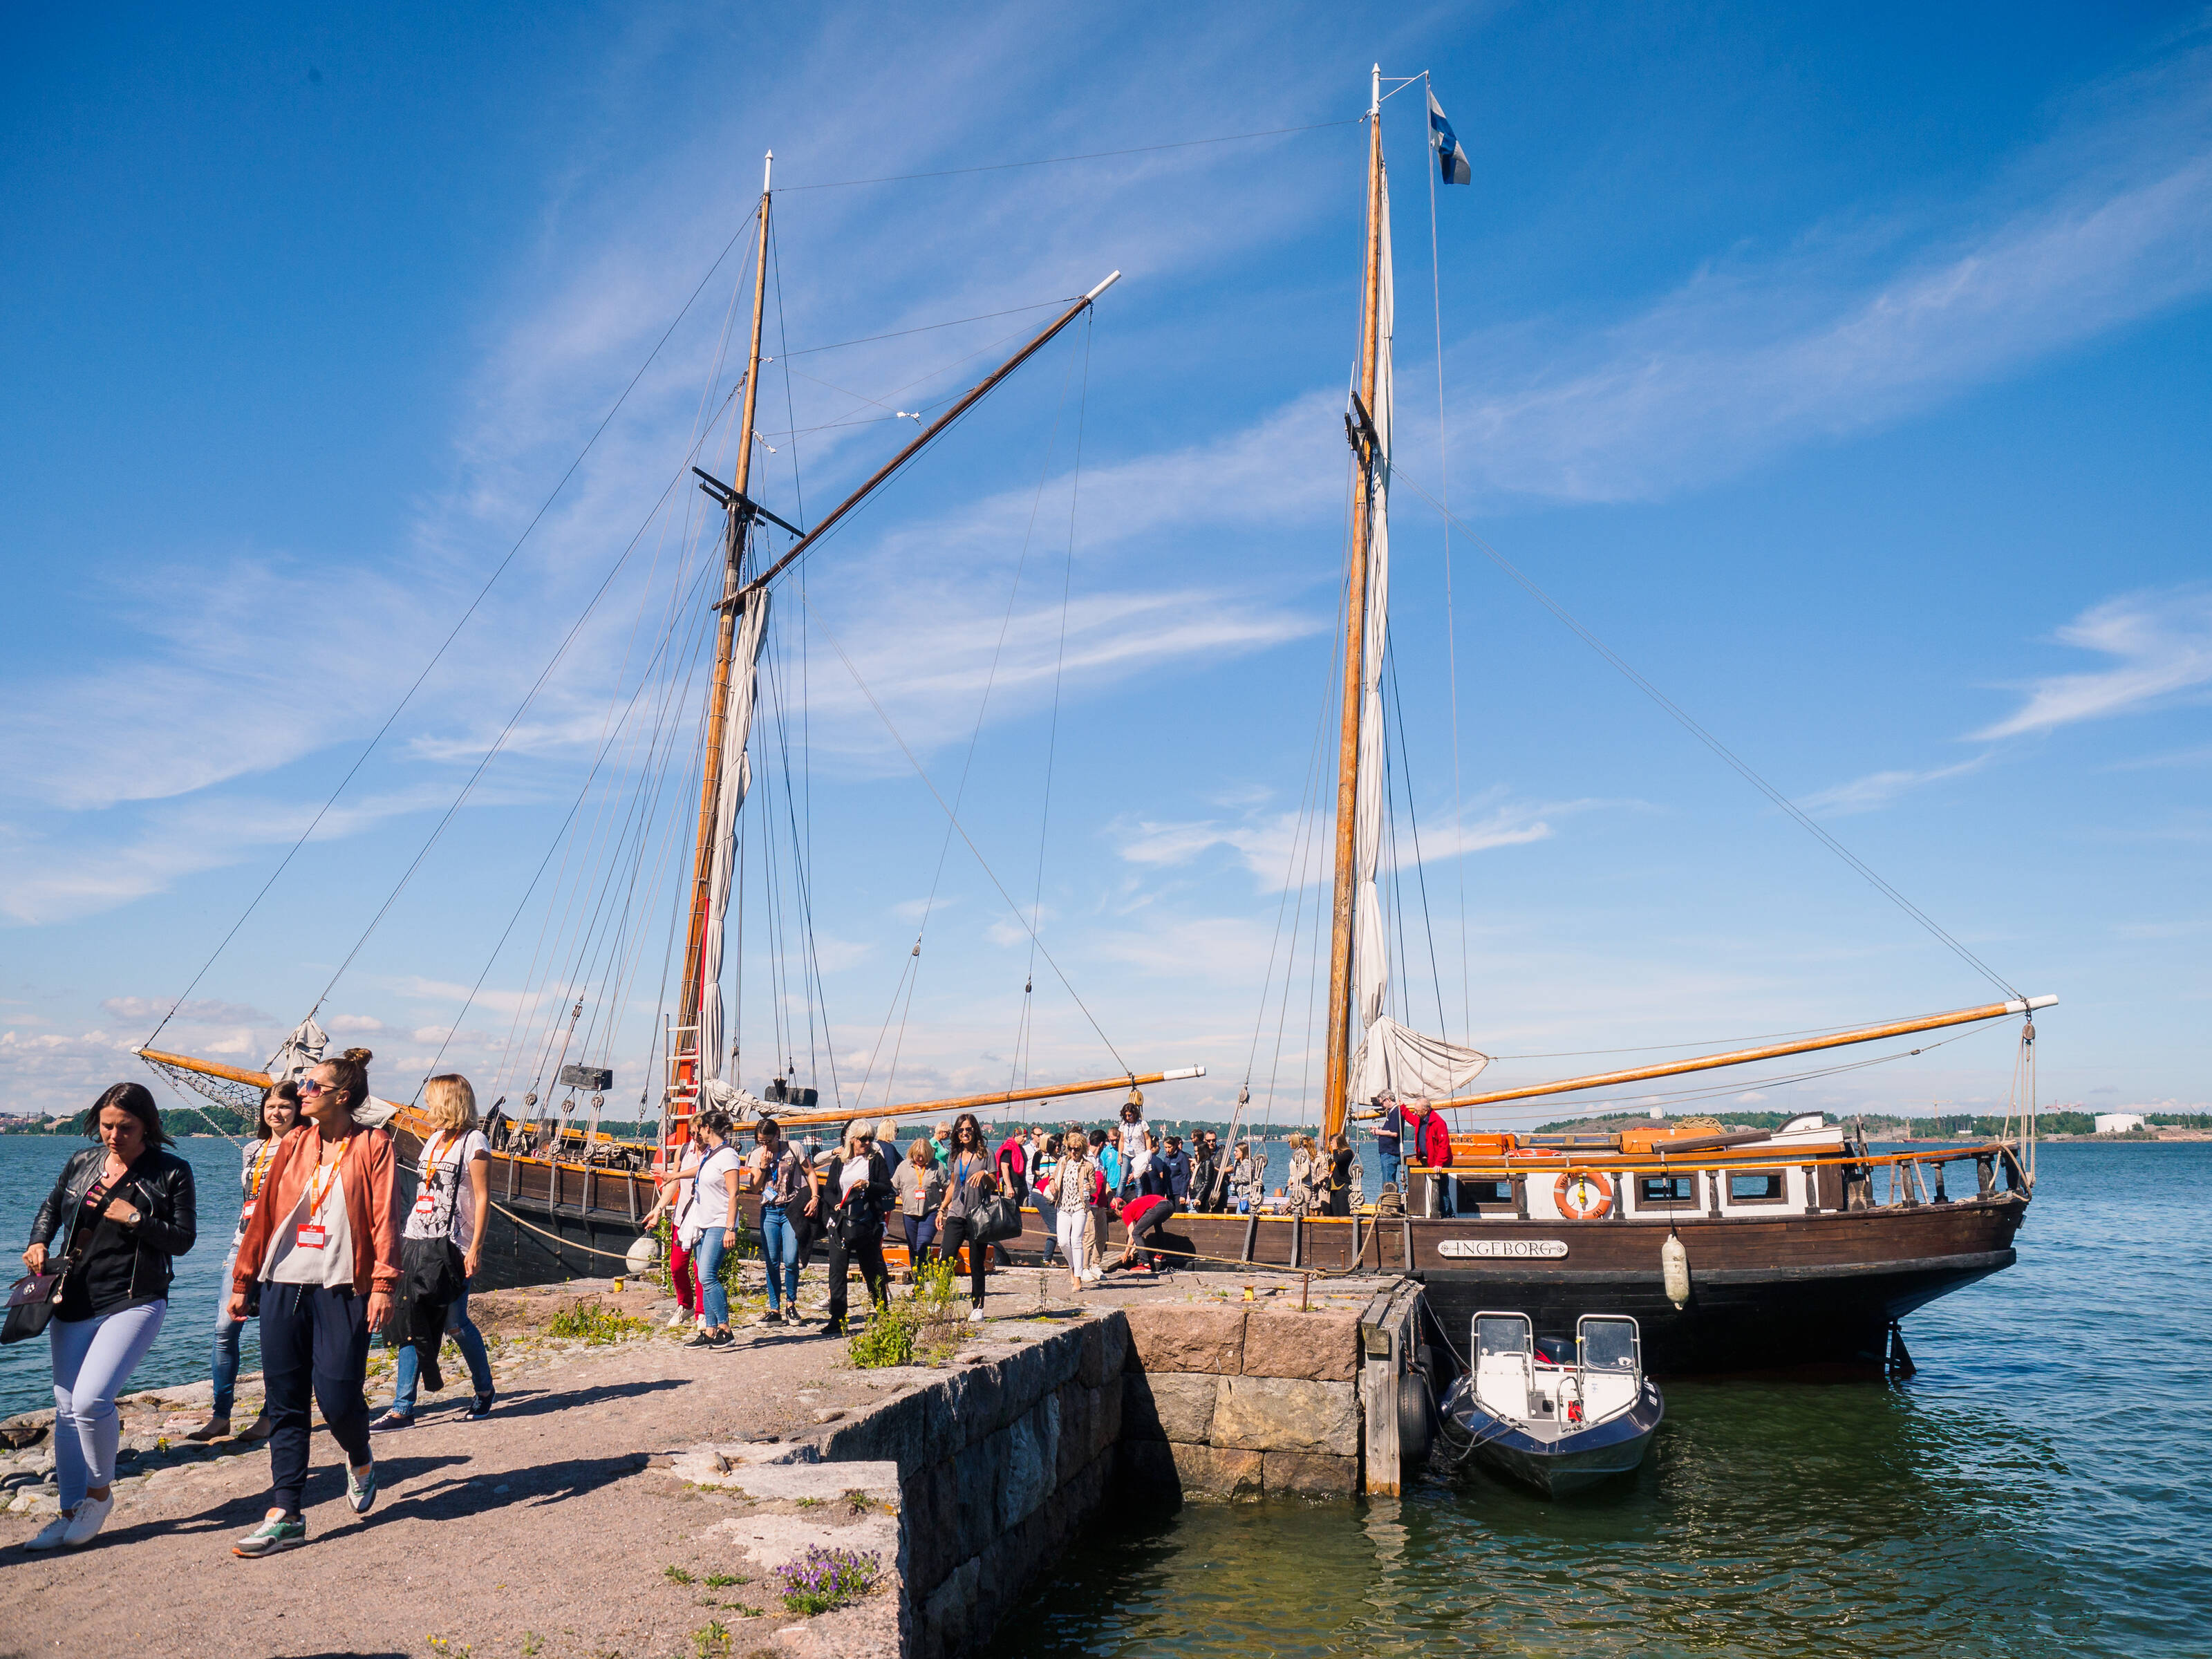 People on a pier in front of a wooden sailing ship